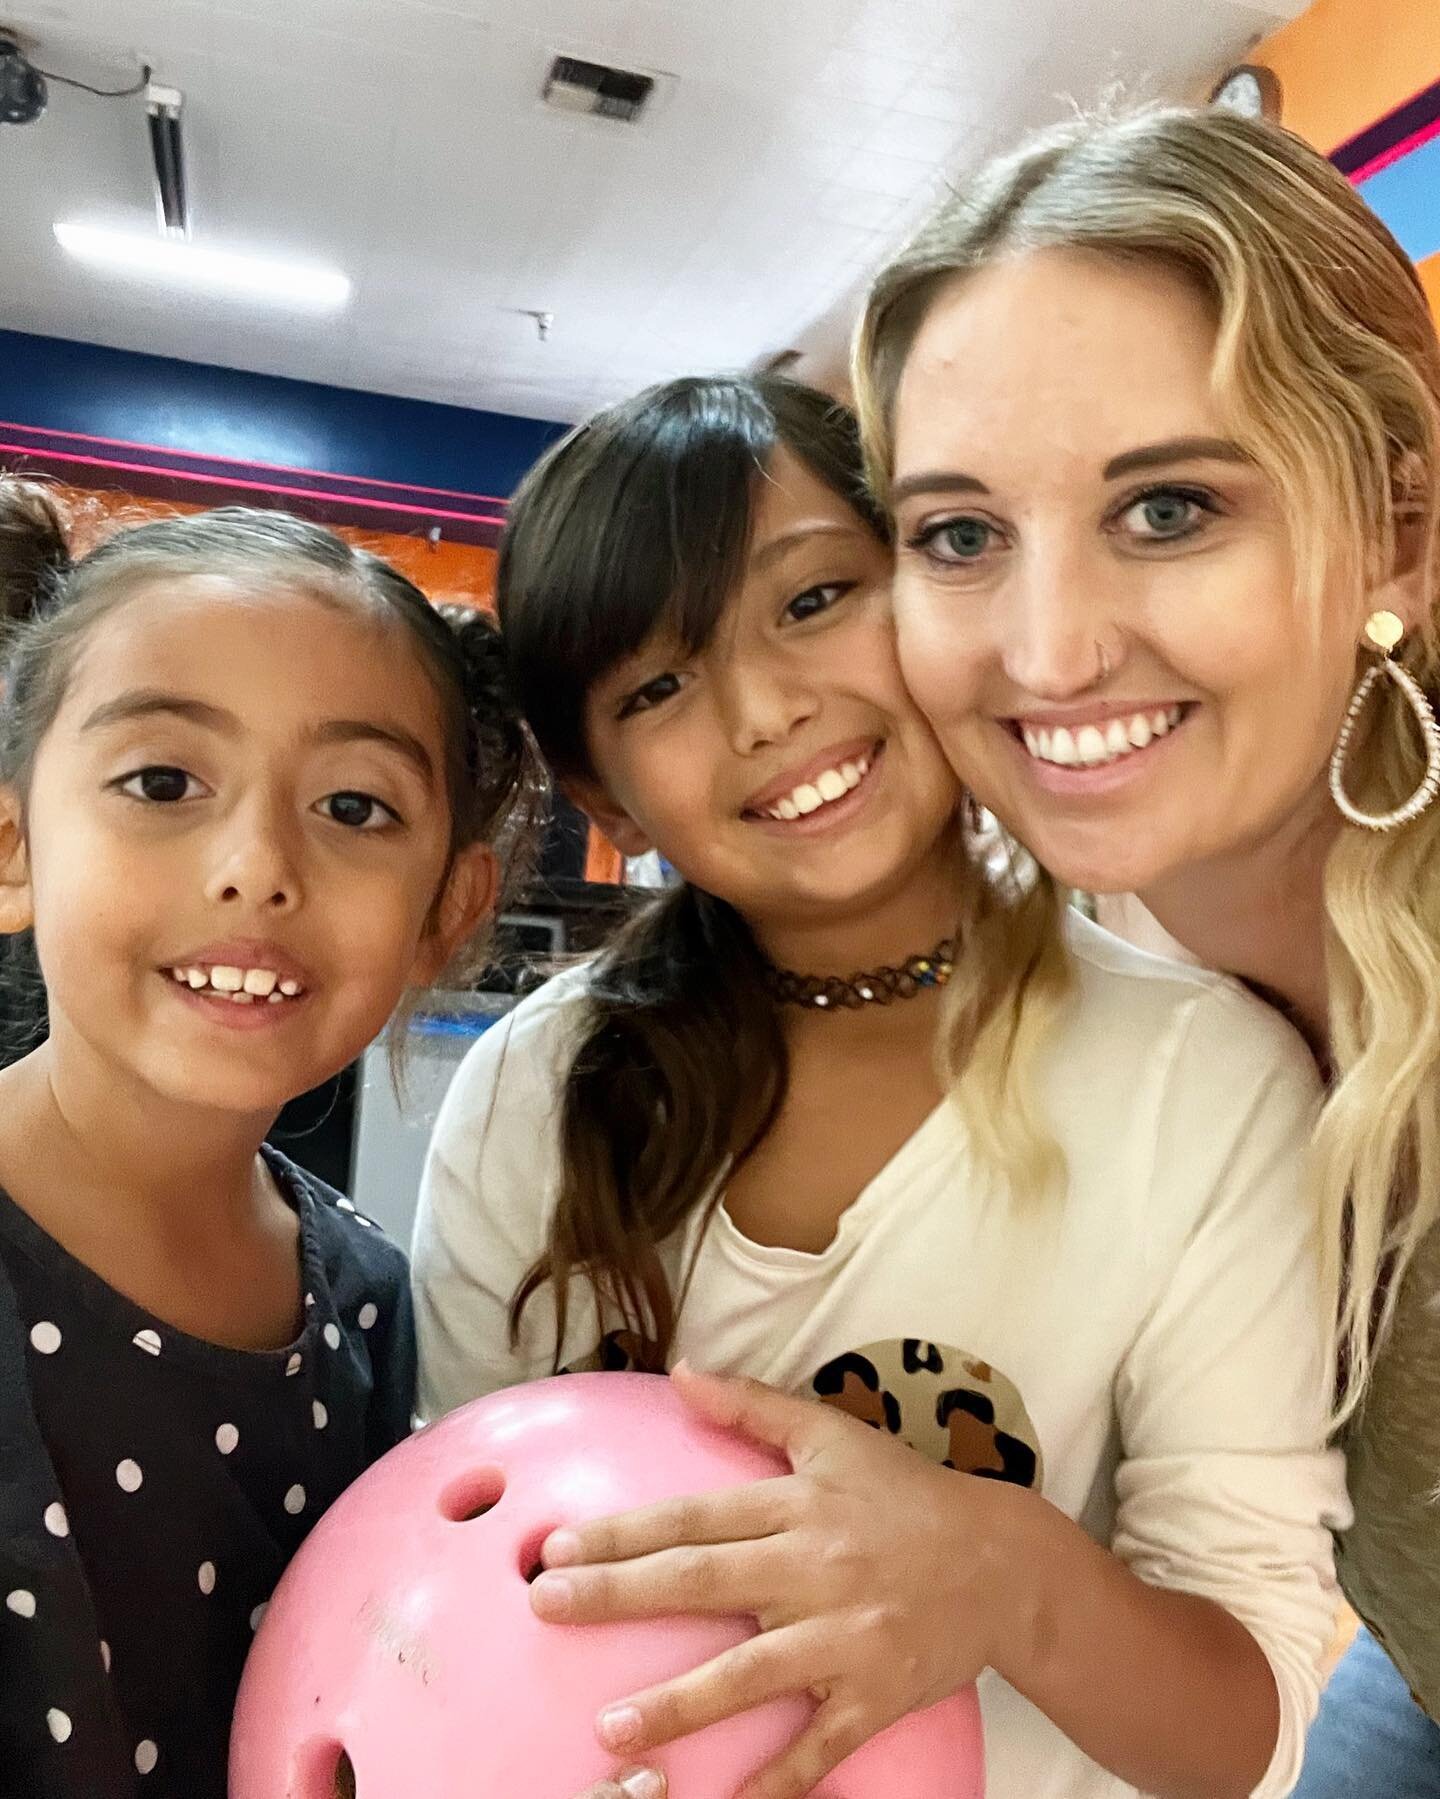 Mother&rsquo;s Day is coming up! We love a cute mommy &amp; me selfie moment in the bowling alley🤩